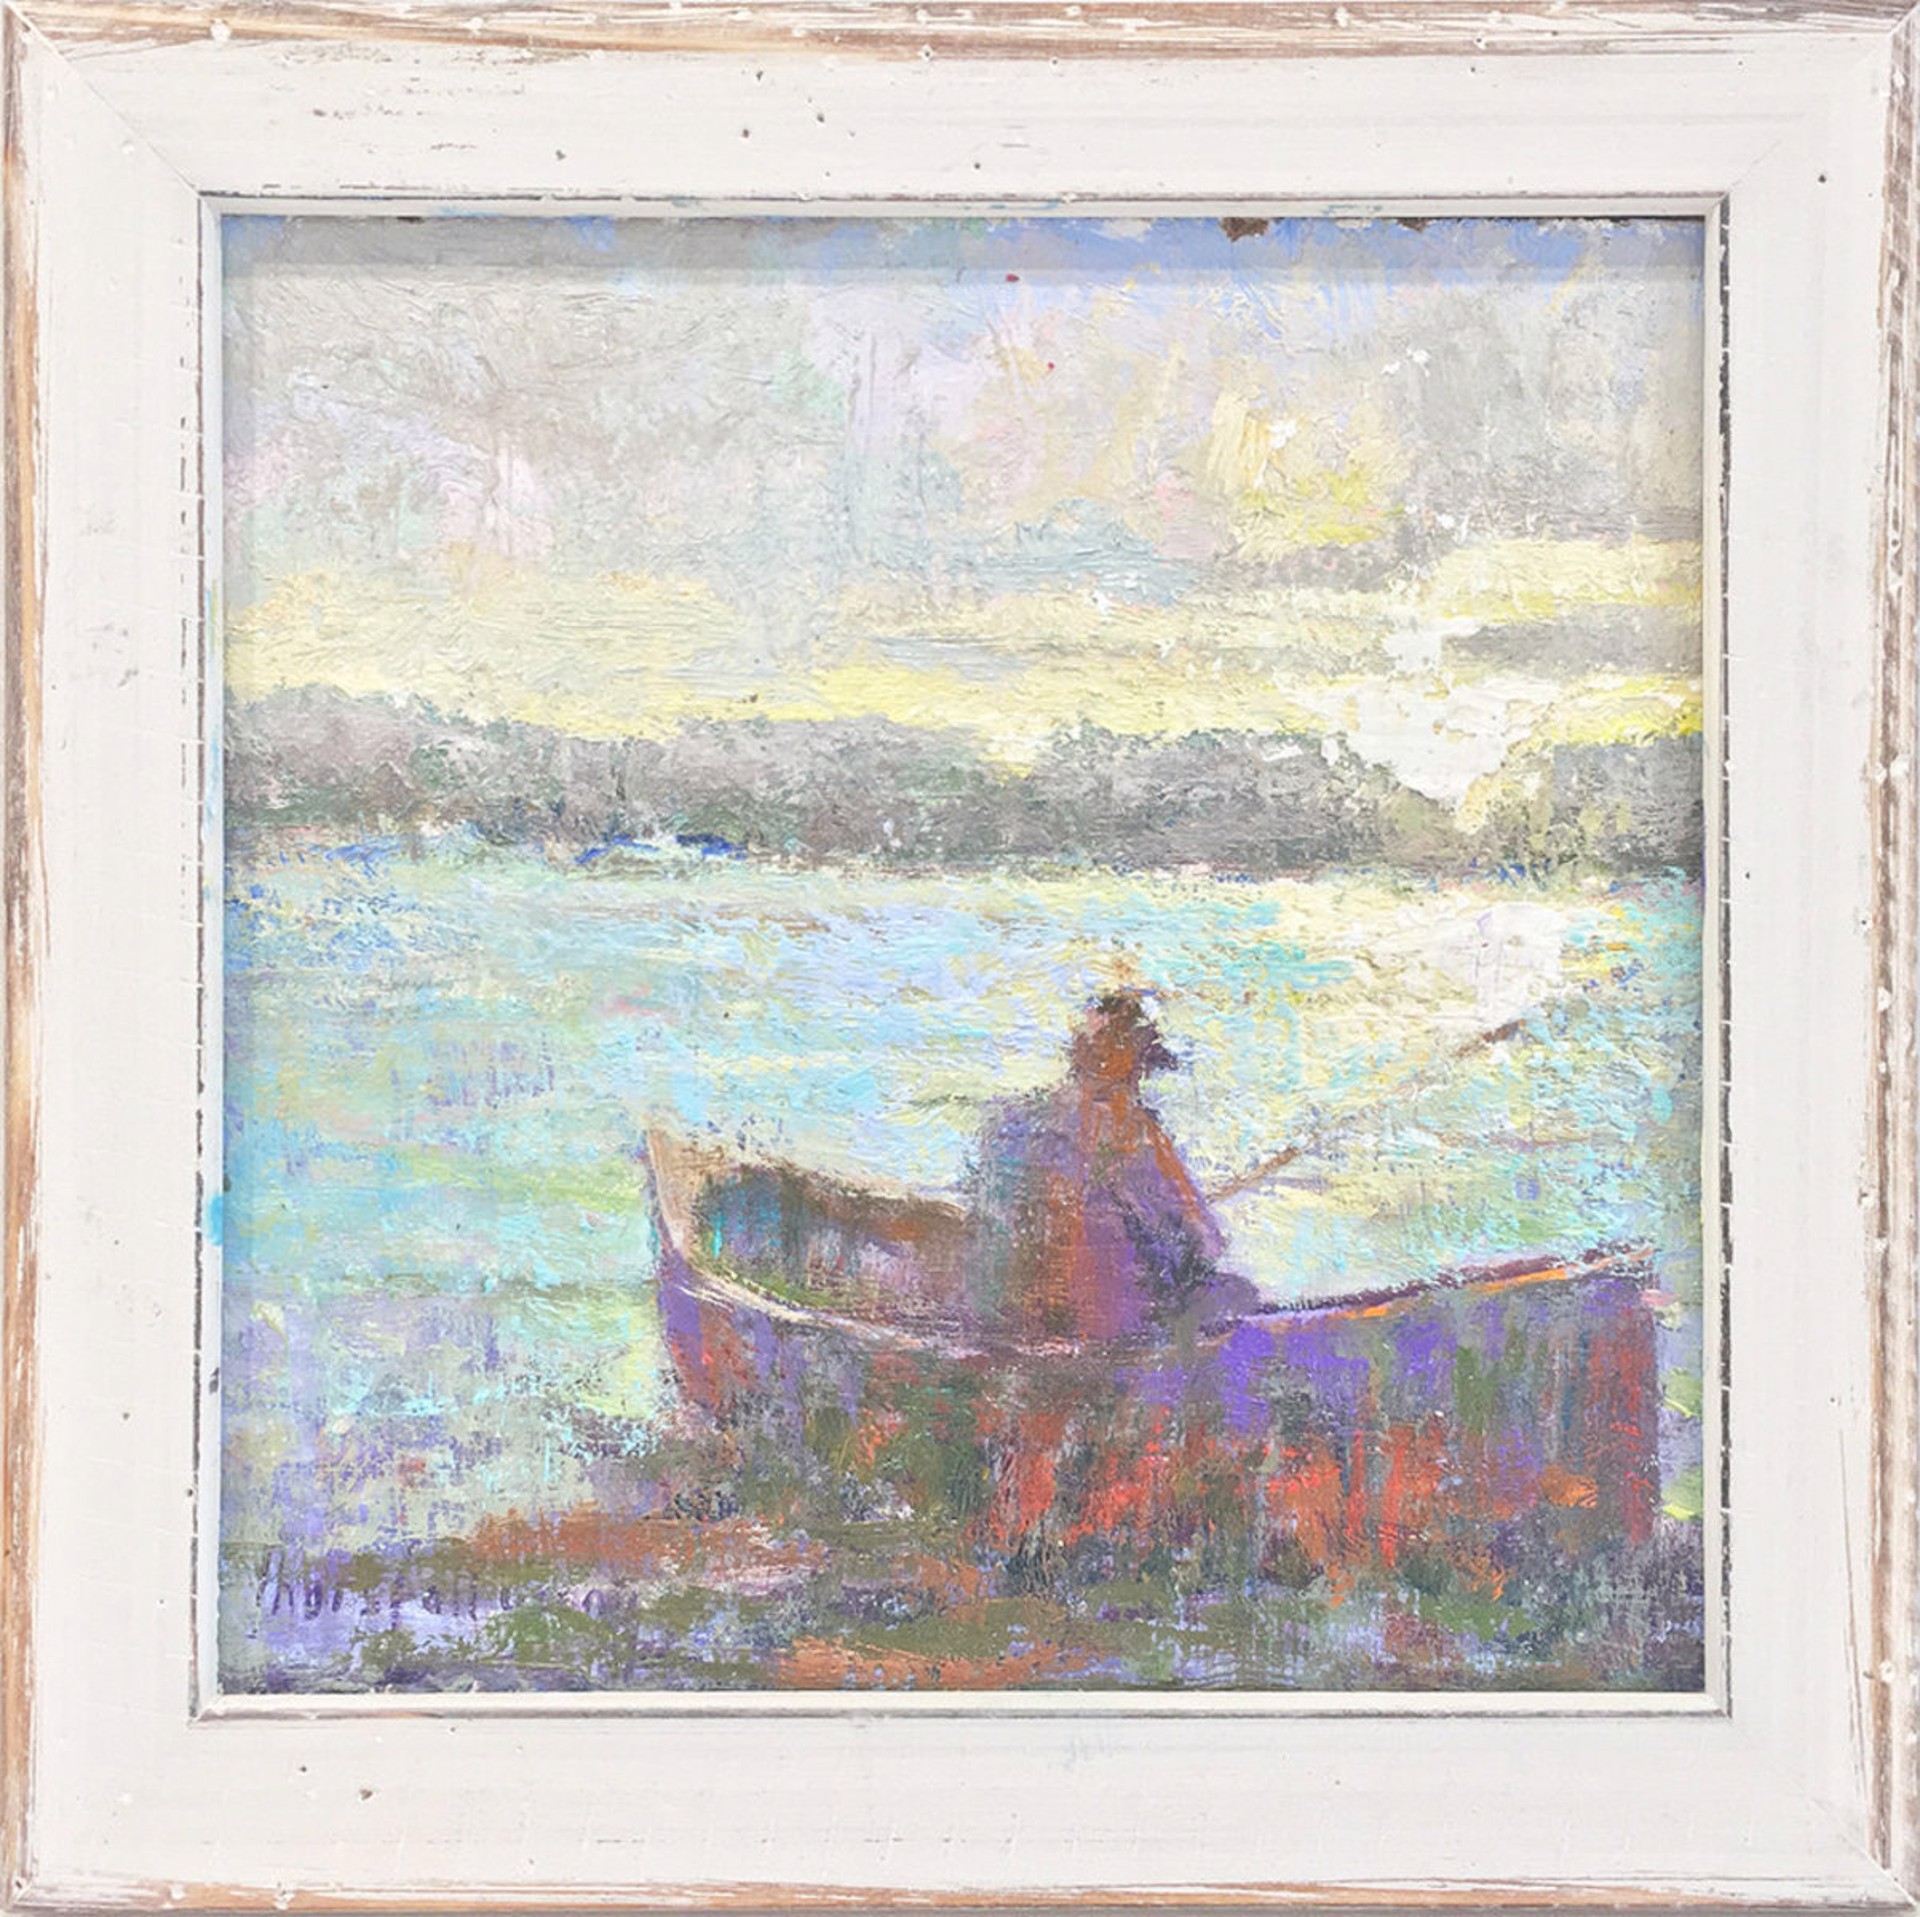 Fishing at Sunrise 2 (L543) by Joan Horsfall Young